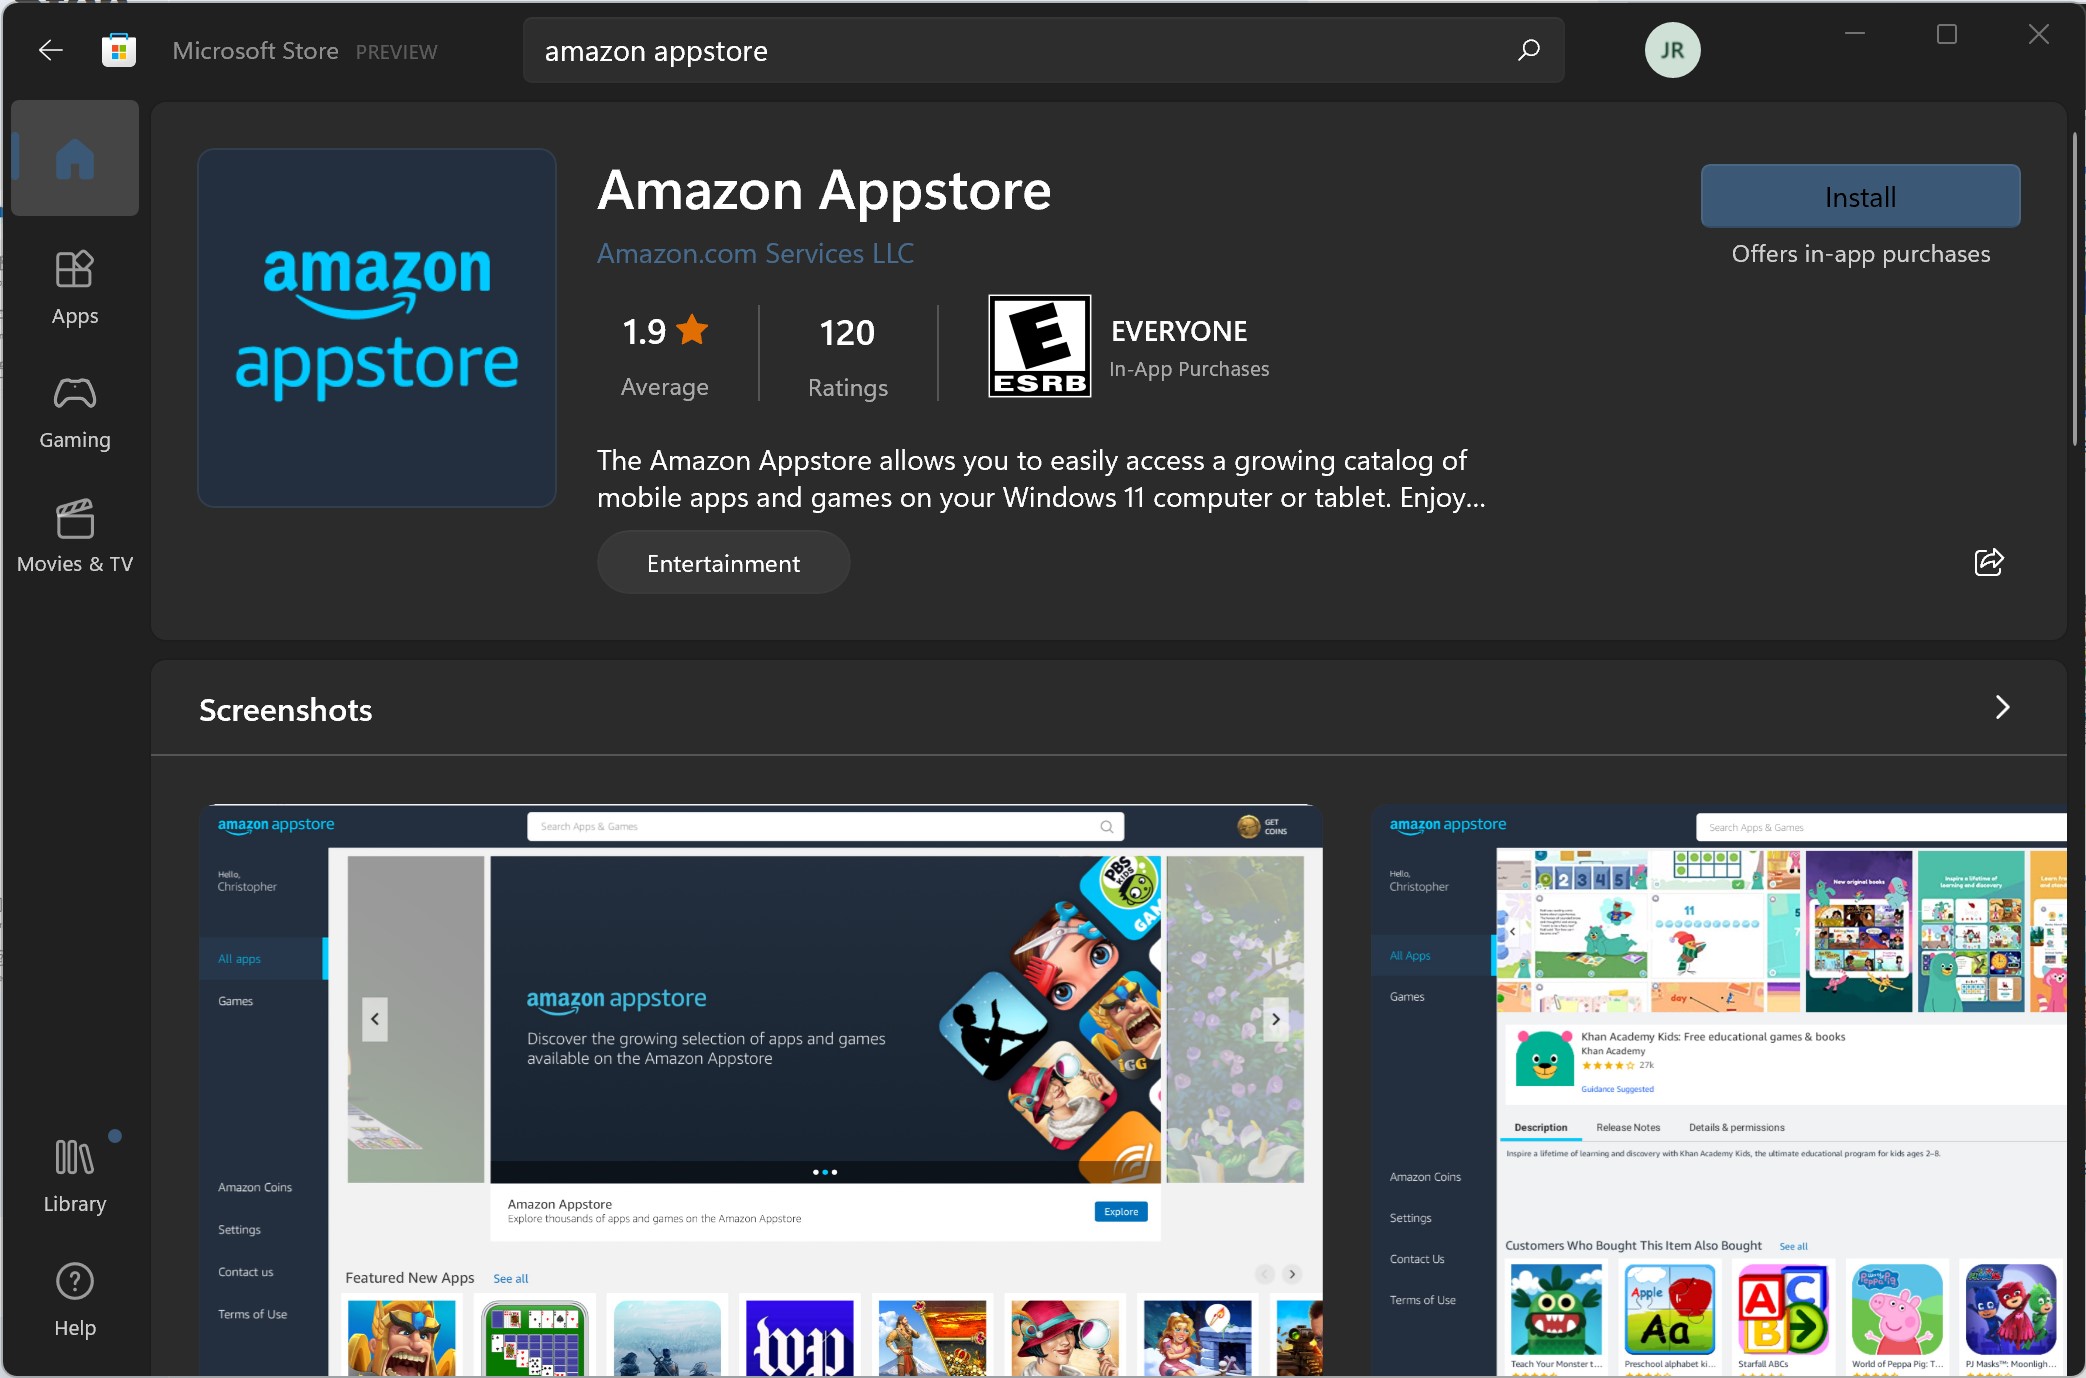 The Microsoft Store listing for Amazon Appstore.